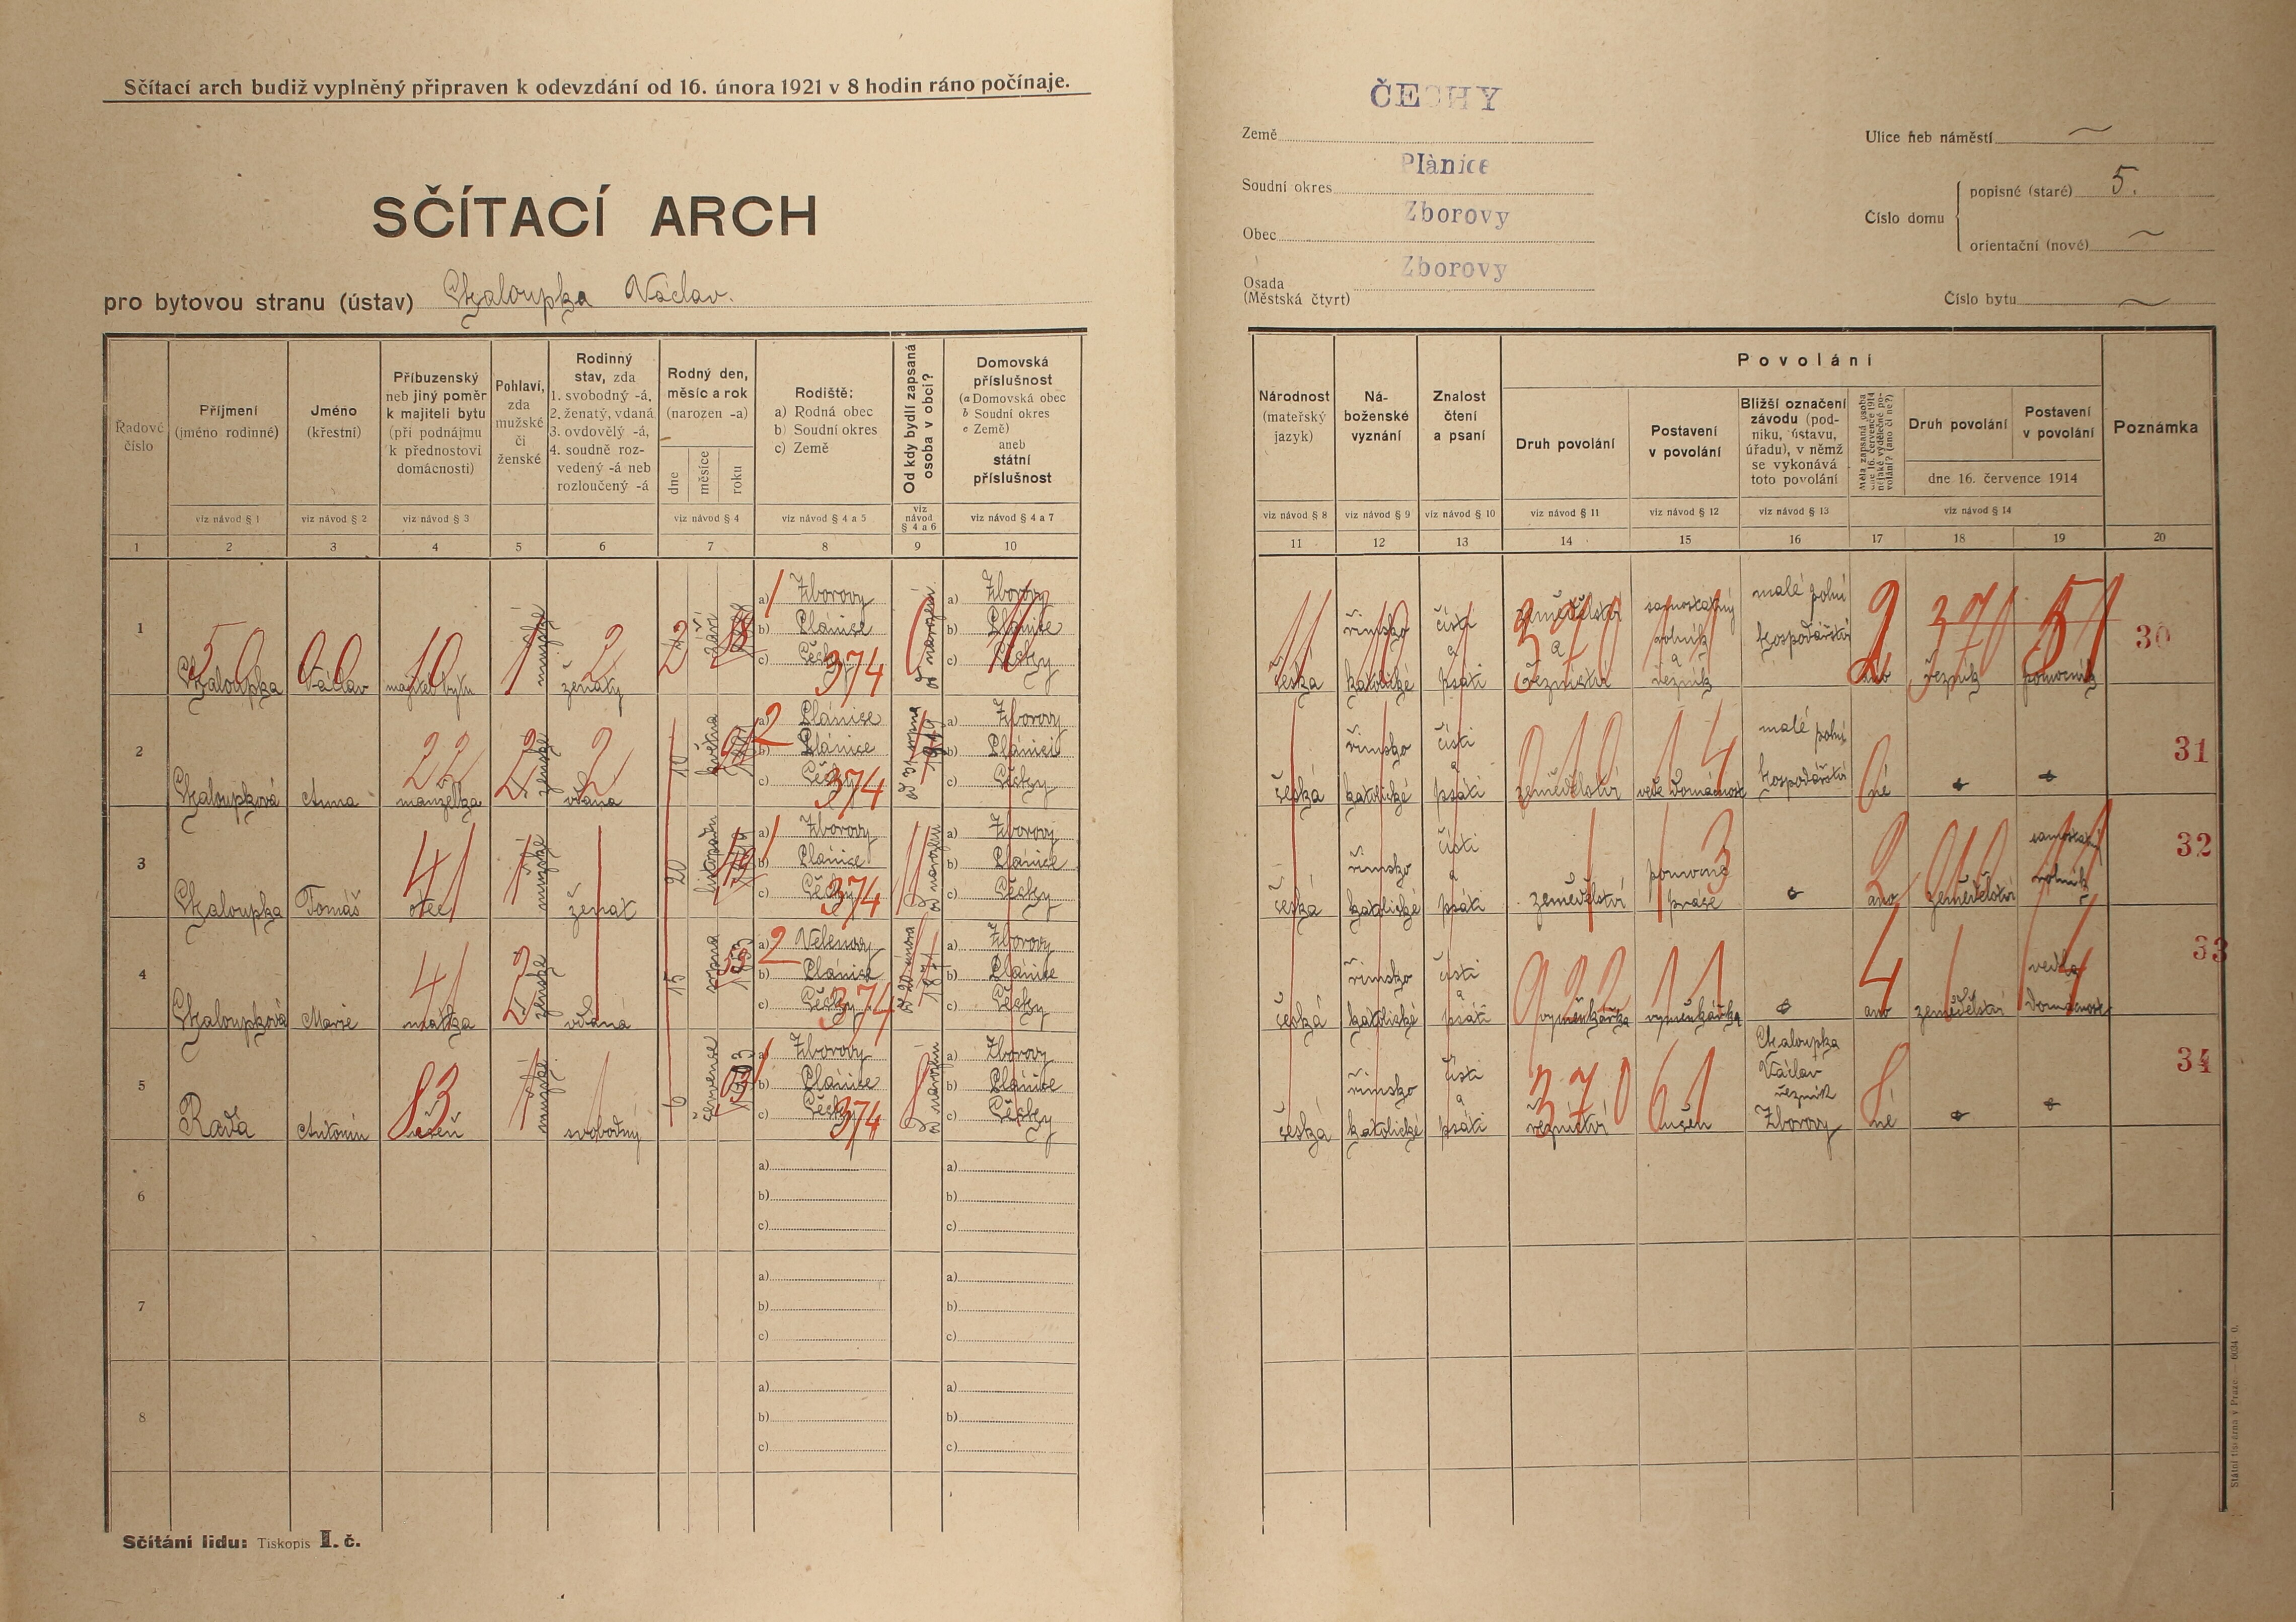 2. soap-kt_01159_census-1921-zborovy-cp005_0020